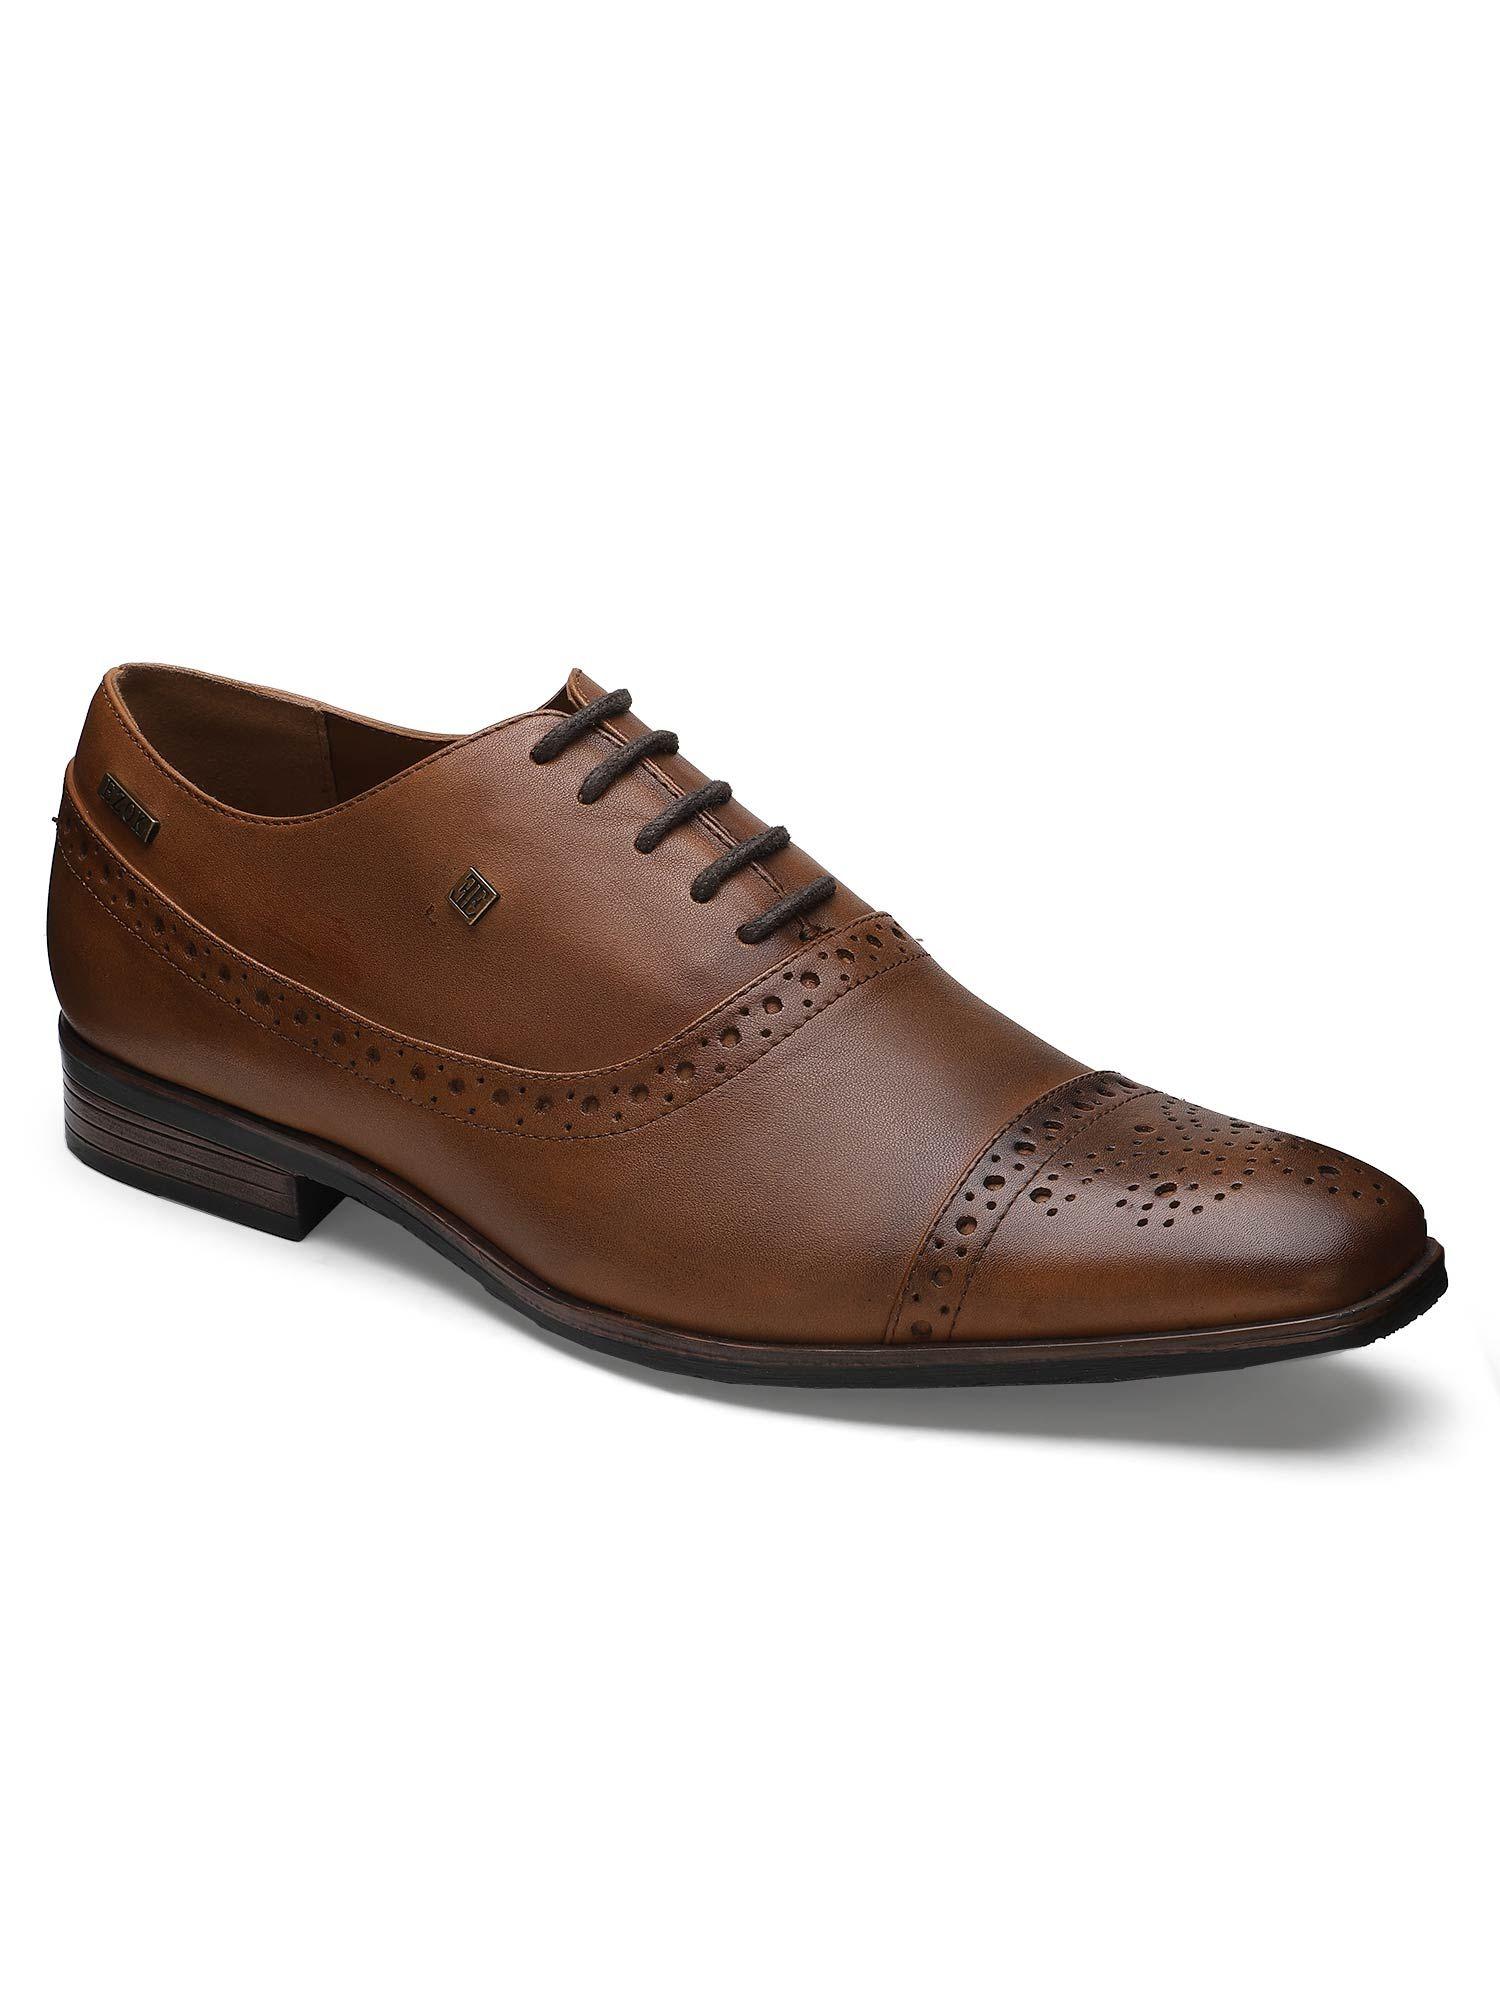 genuine leather brown solid formal brogue shoes for men